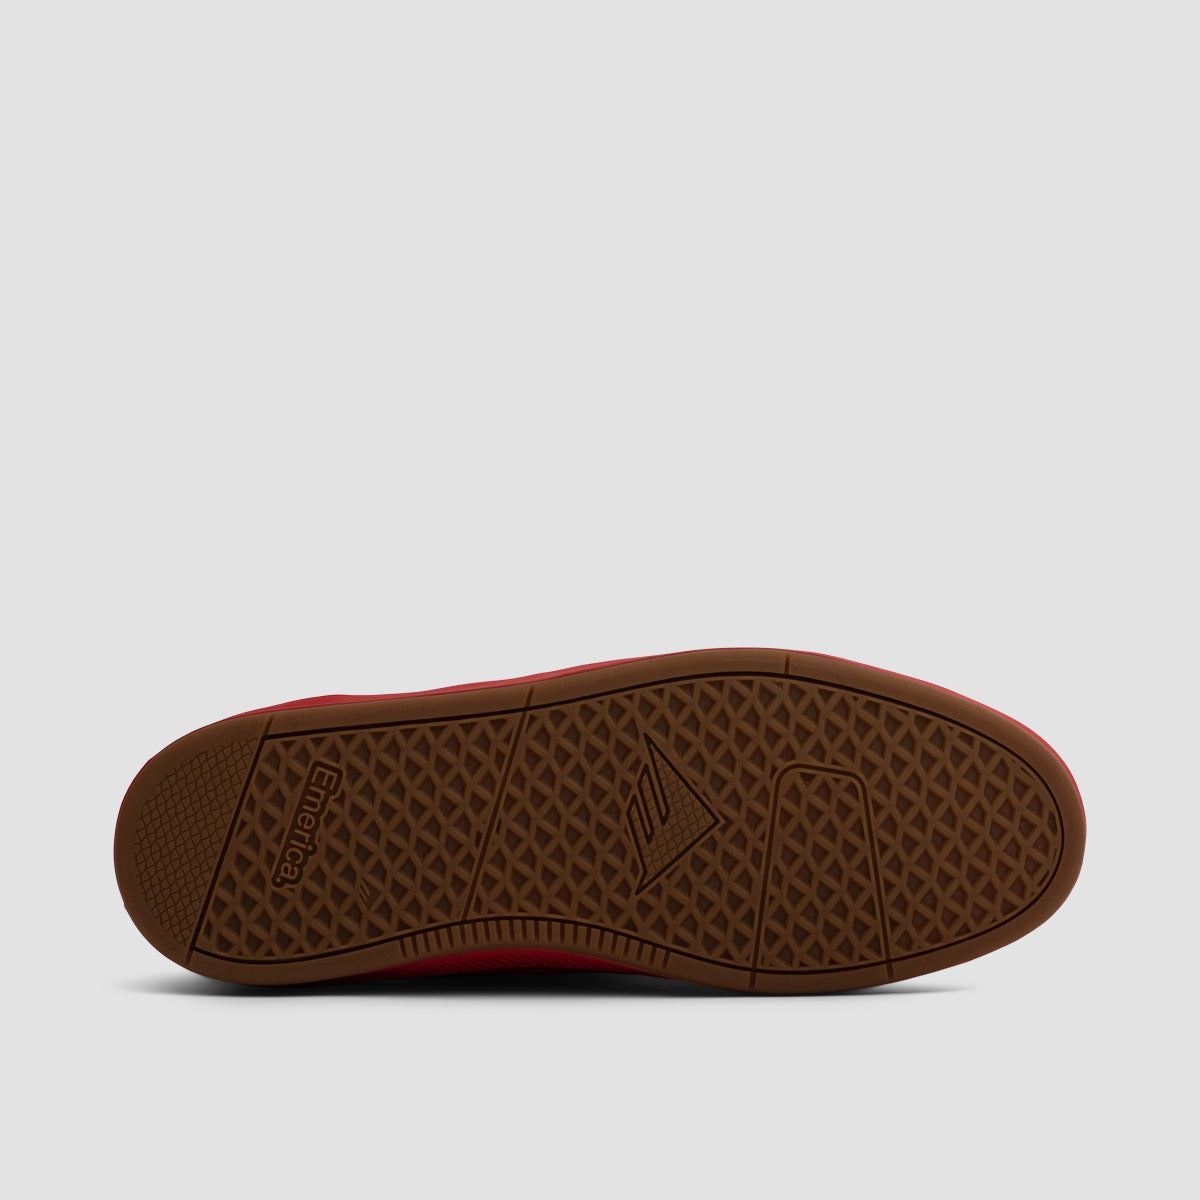 Emerica The Romero Laced Shoes - Red/Gold